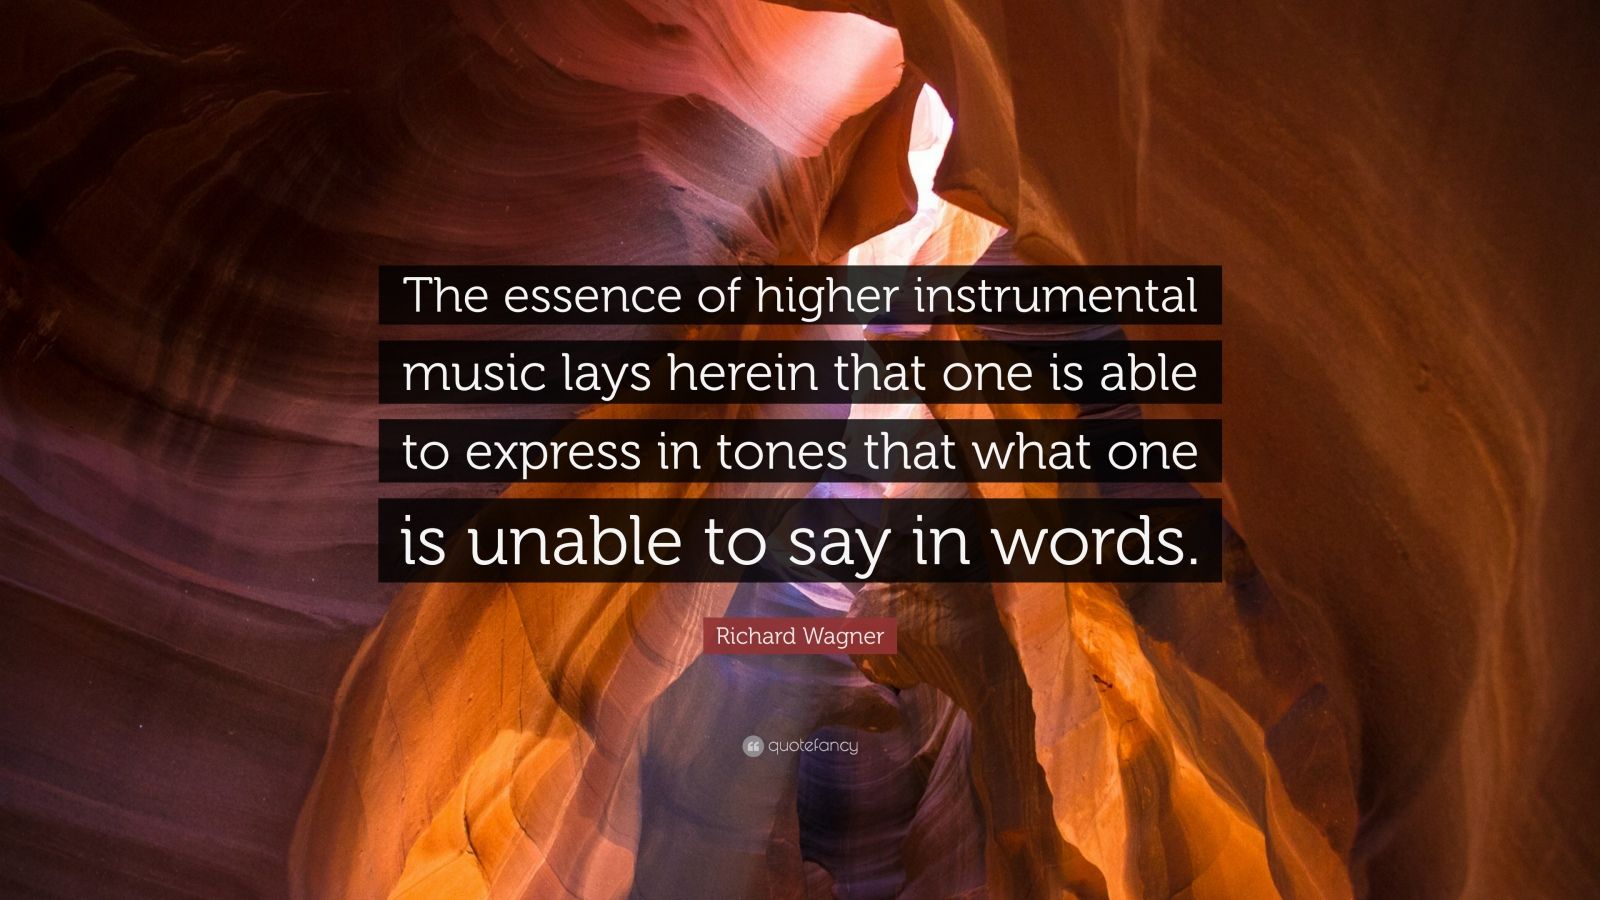 Una noche mineral A fondo Richard Wagner Quote: “The essence of higher instrumental music lays herein  that one is able to express in tones that what one is unable to say...”